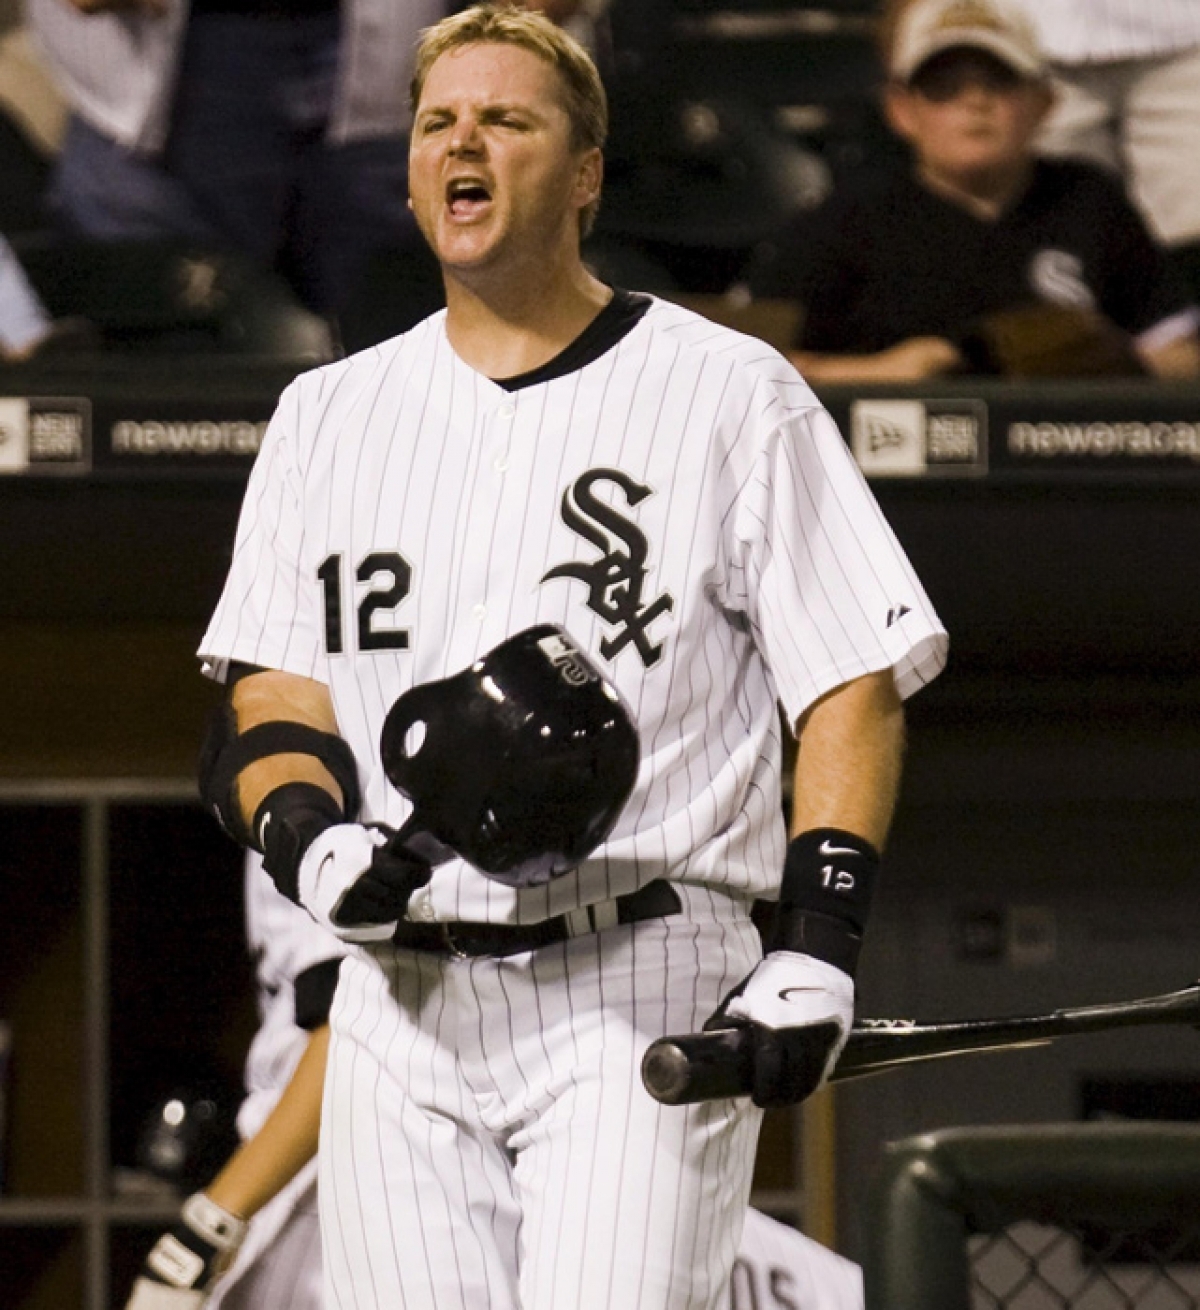 A.J. Pierzynski aging, but only behind the plate - South Side Sox